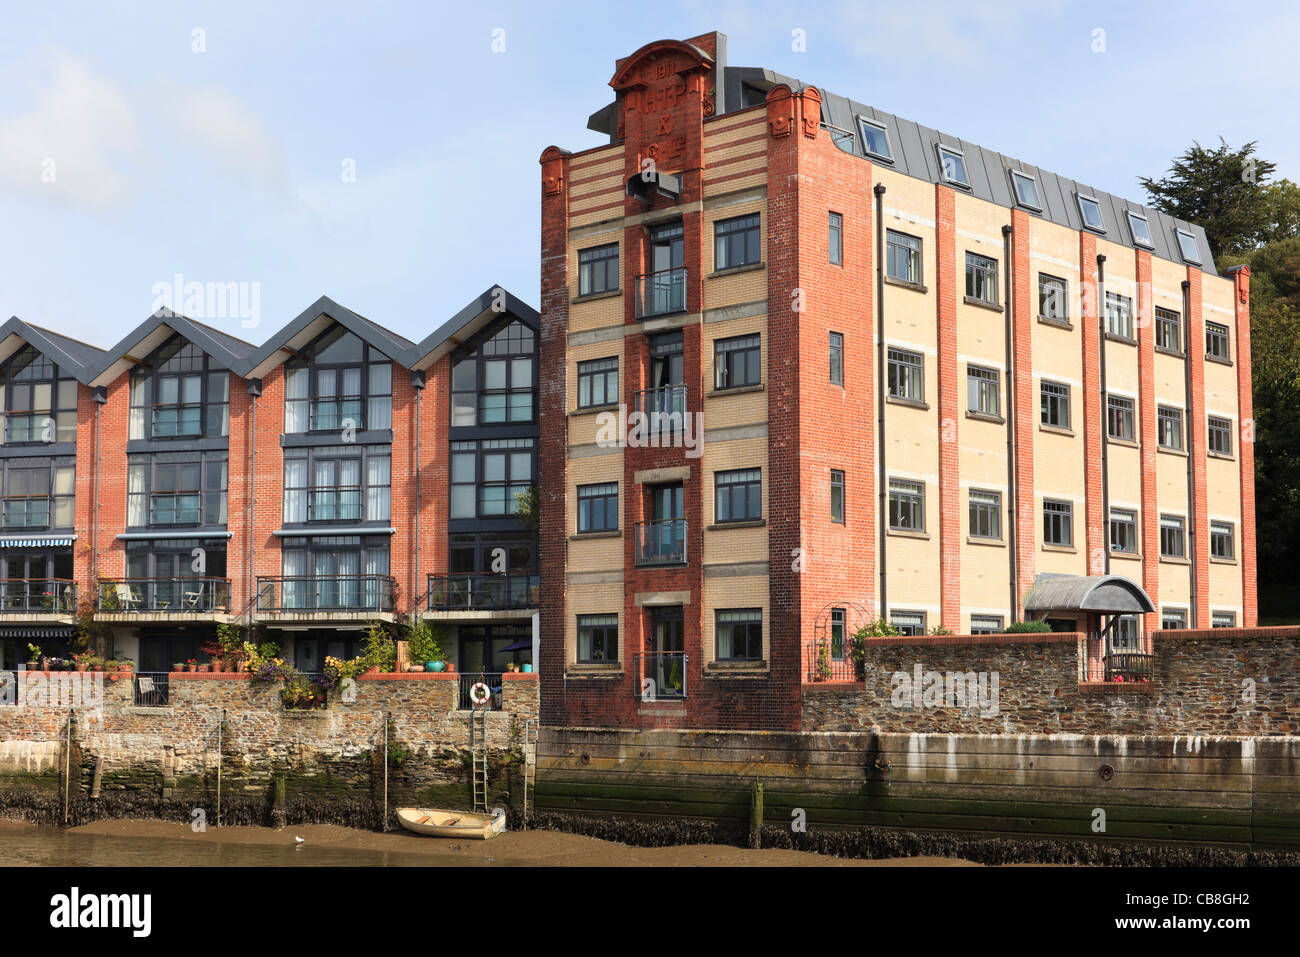 Old warehouse building converted into modern riverside residential apartments in Truro, Cornwall, England, UK, Great Britain. Stock Photo